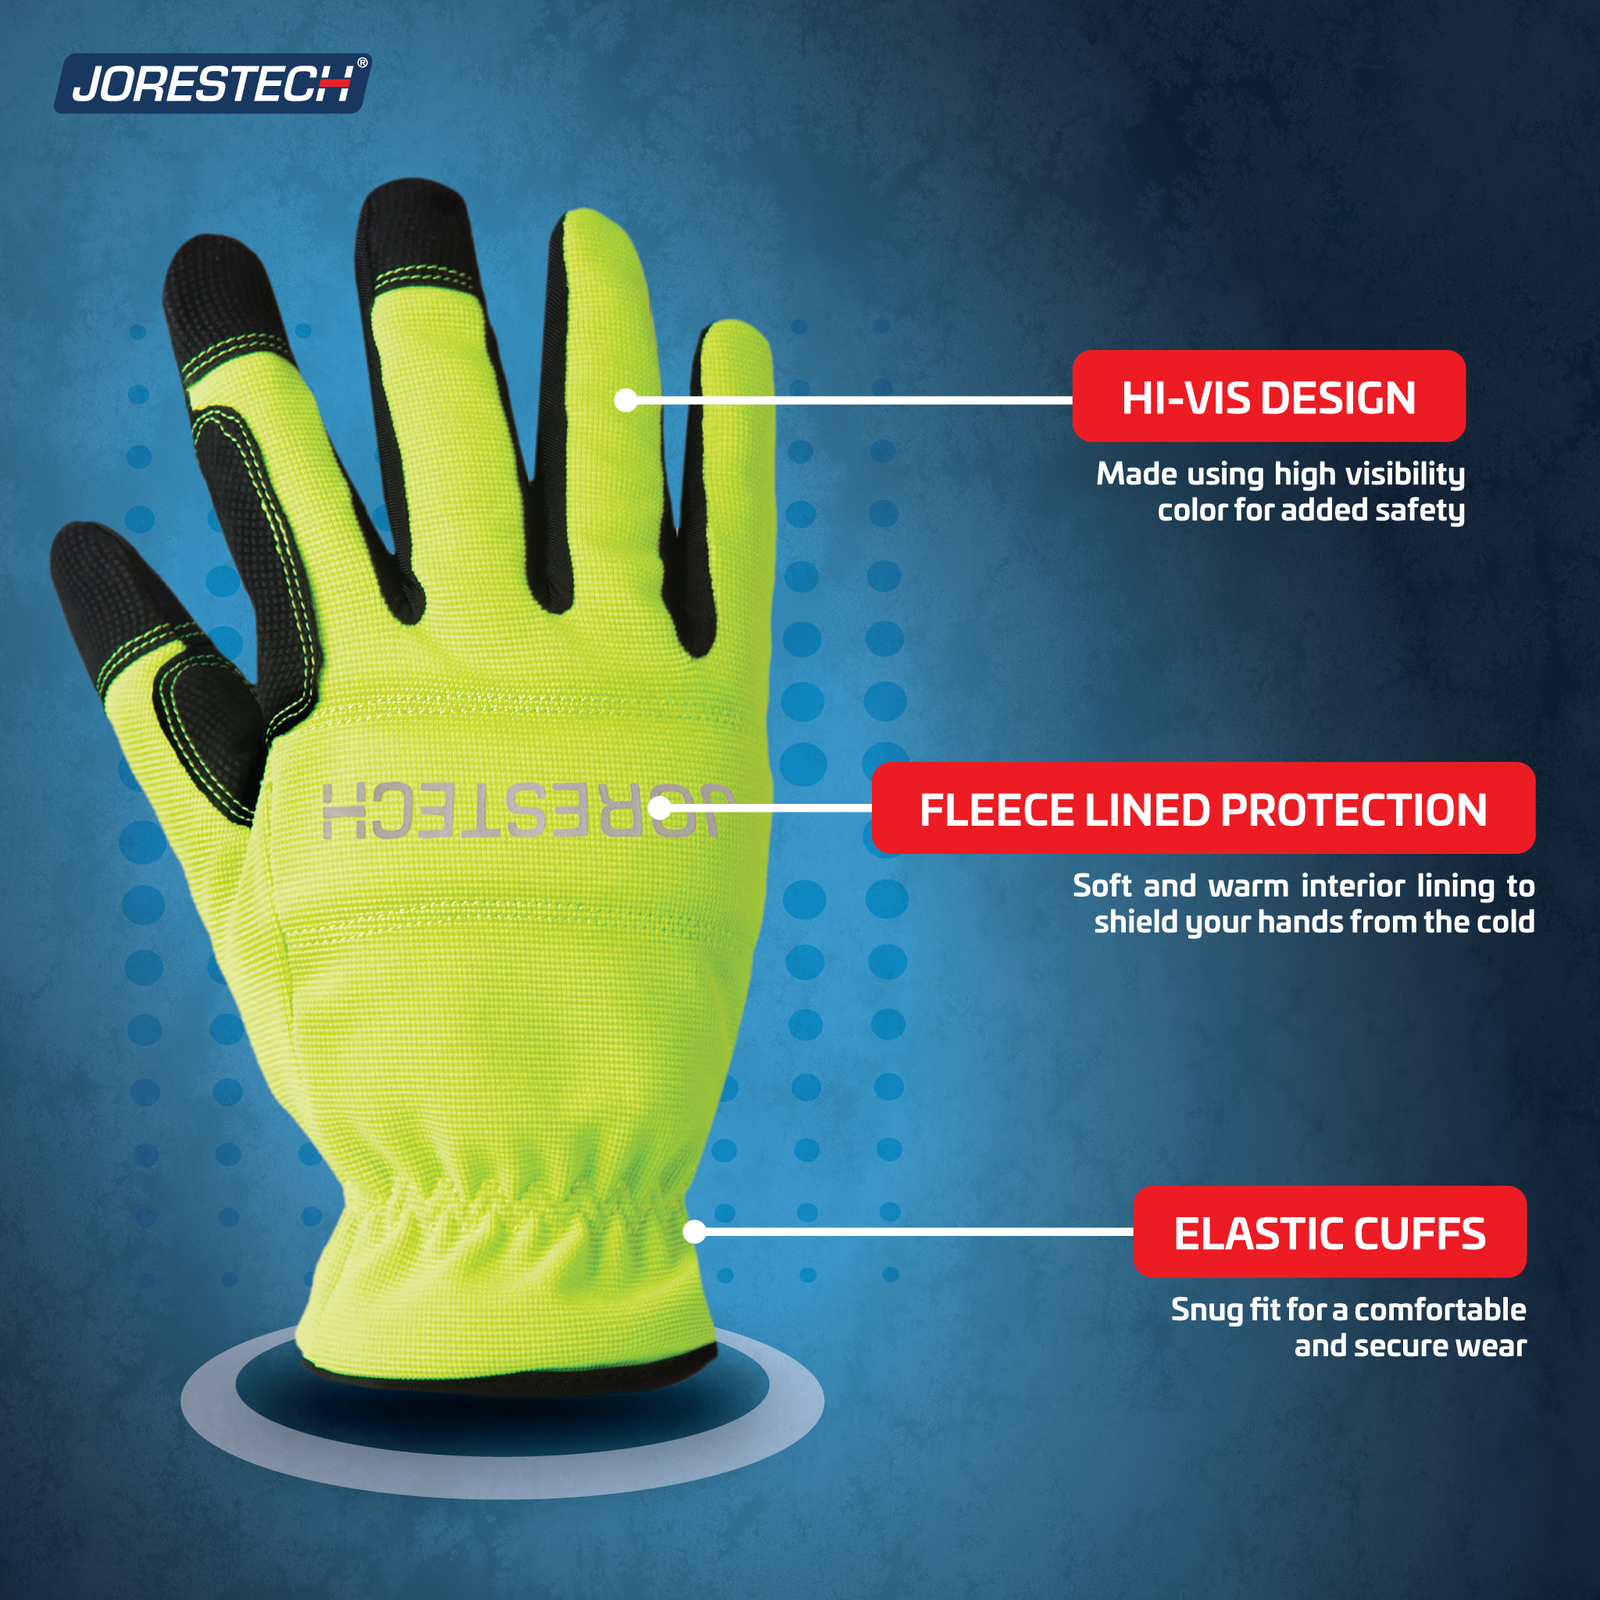 Multipurpose hi vis safety glove with fleece liner for weather protection and elastic cuff for a more comfortable and snug fit